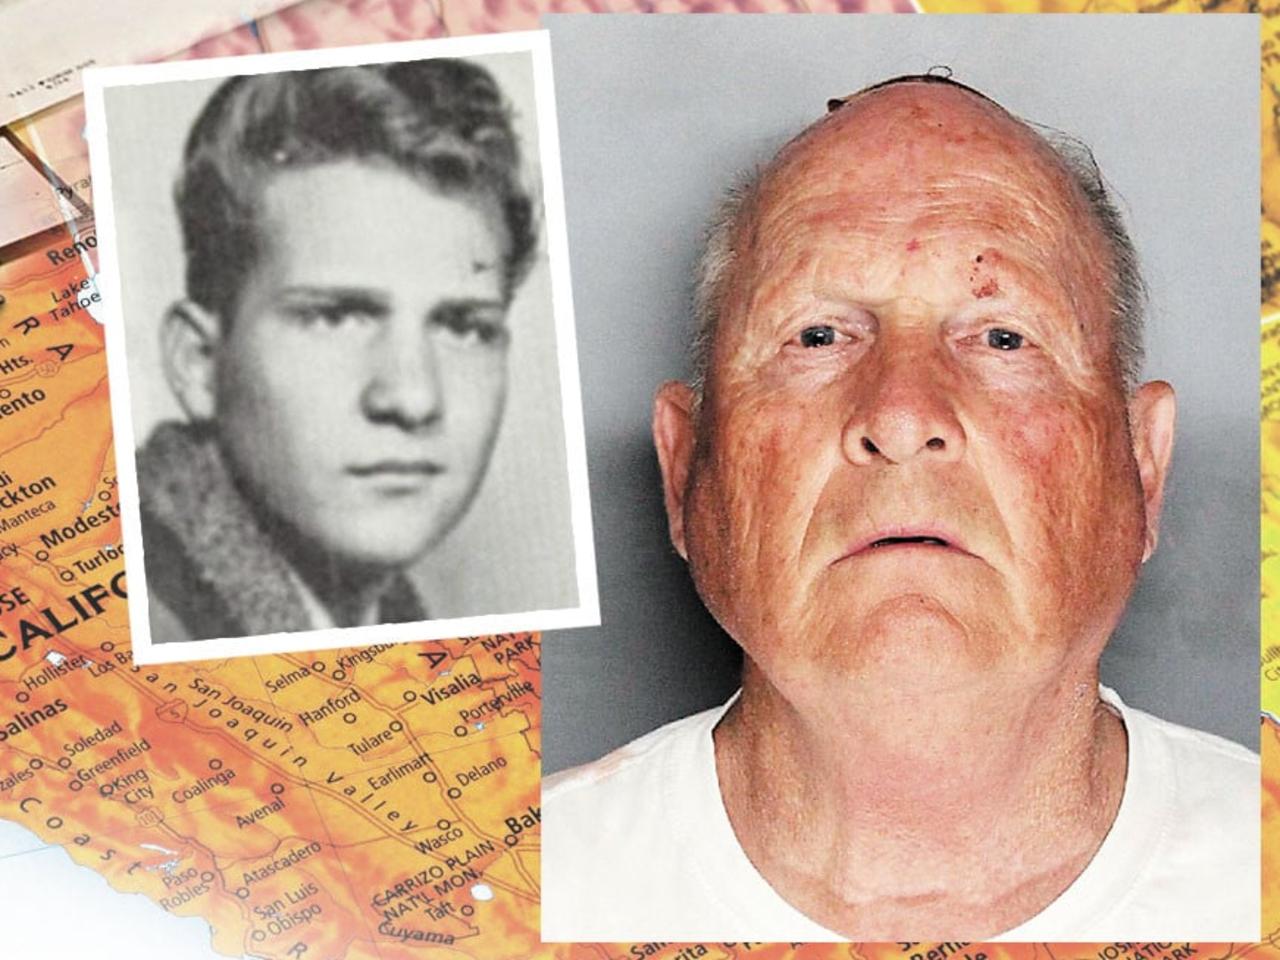 Man In The Window: The Golden State Killer - True Crime Podcast